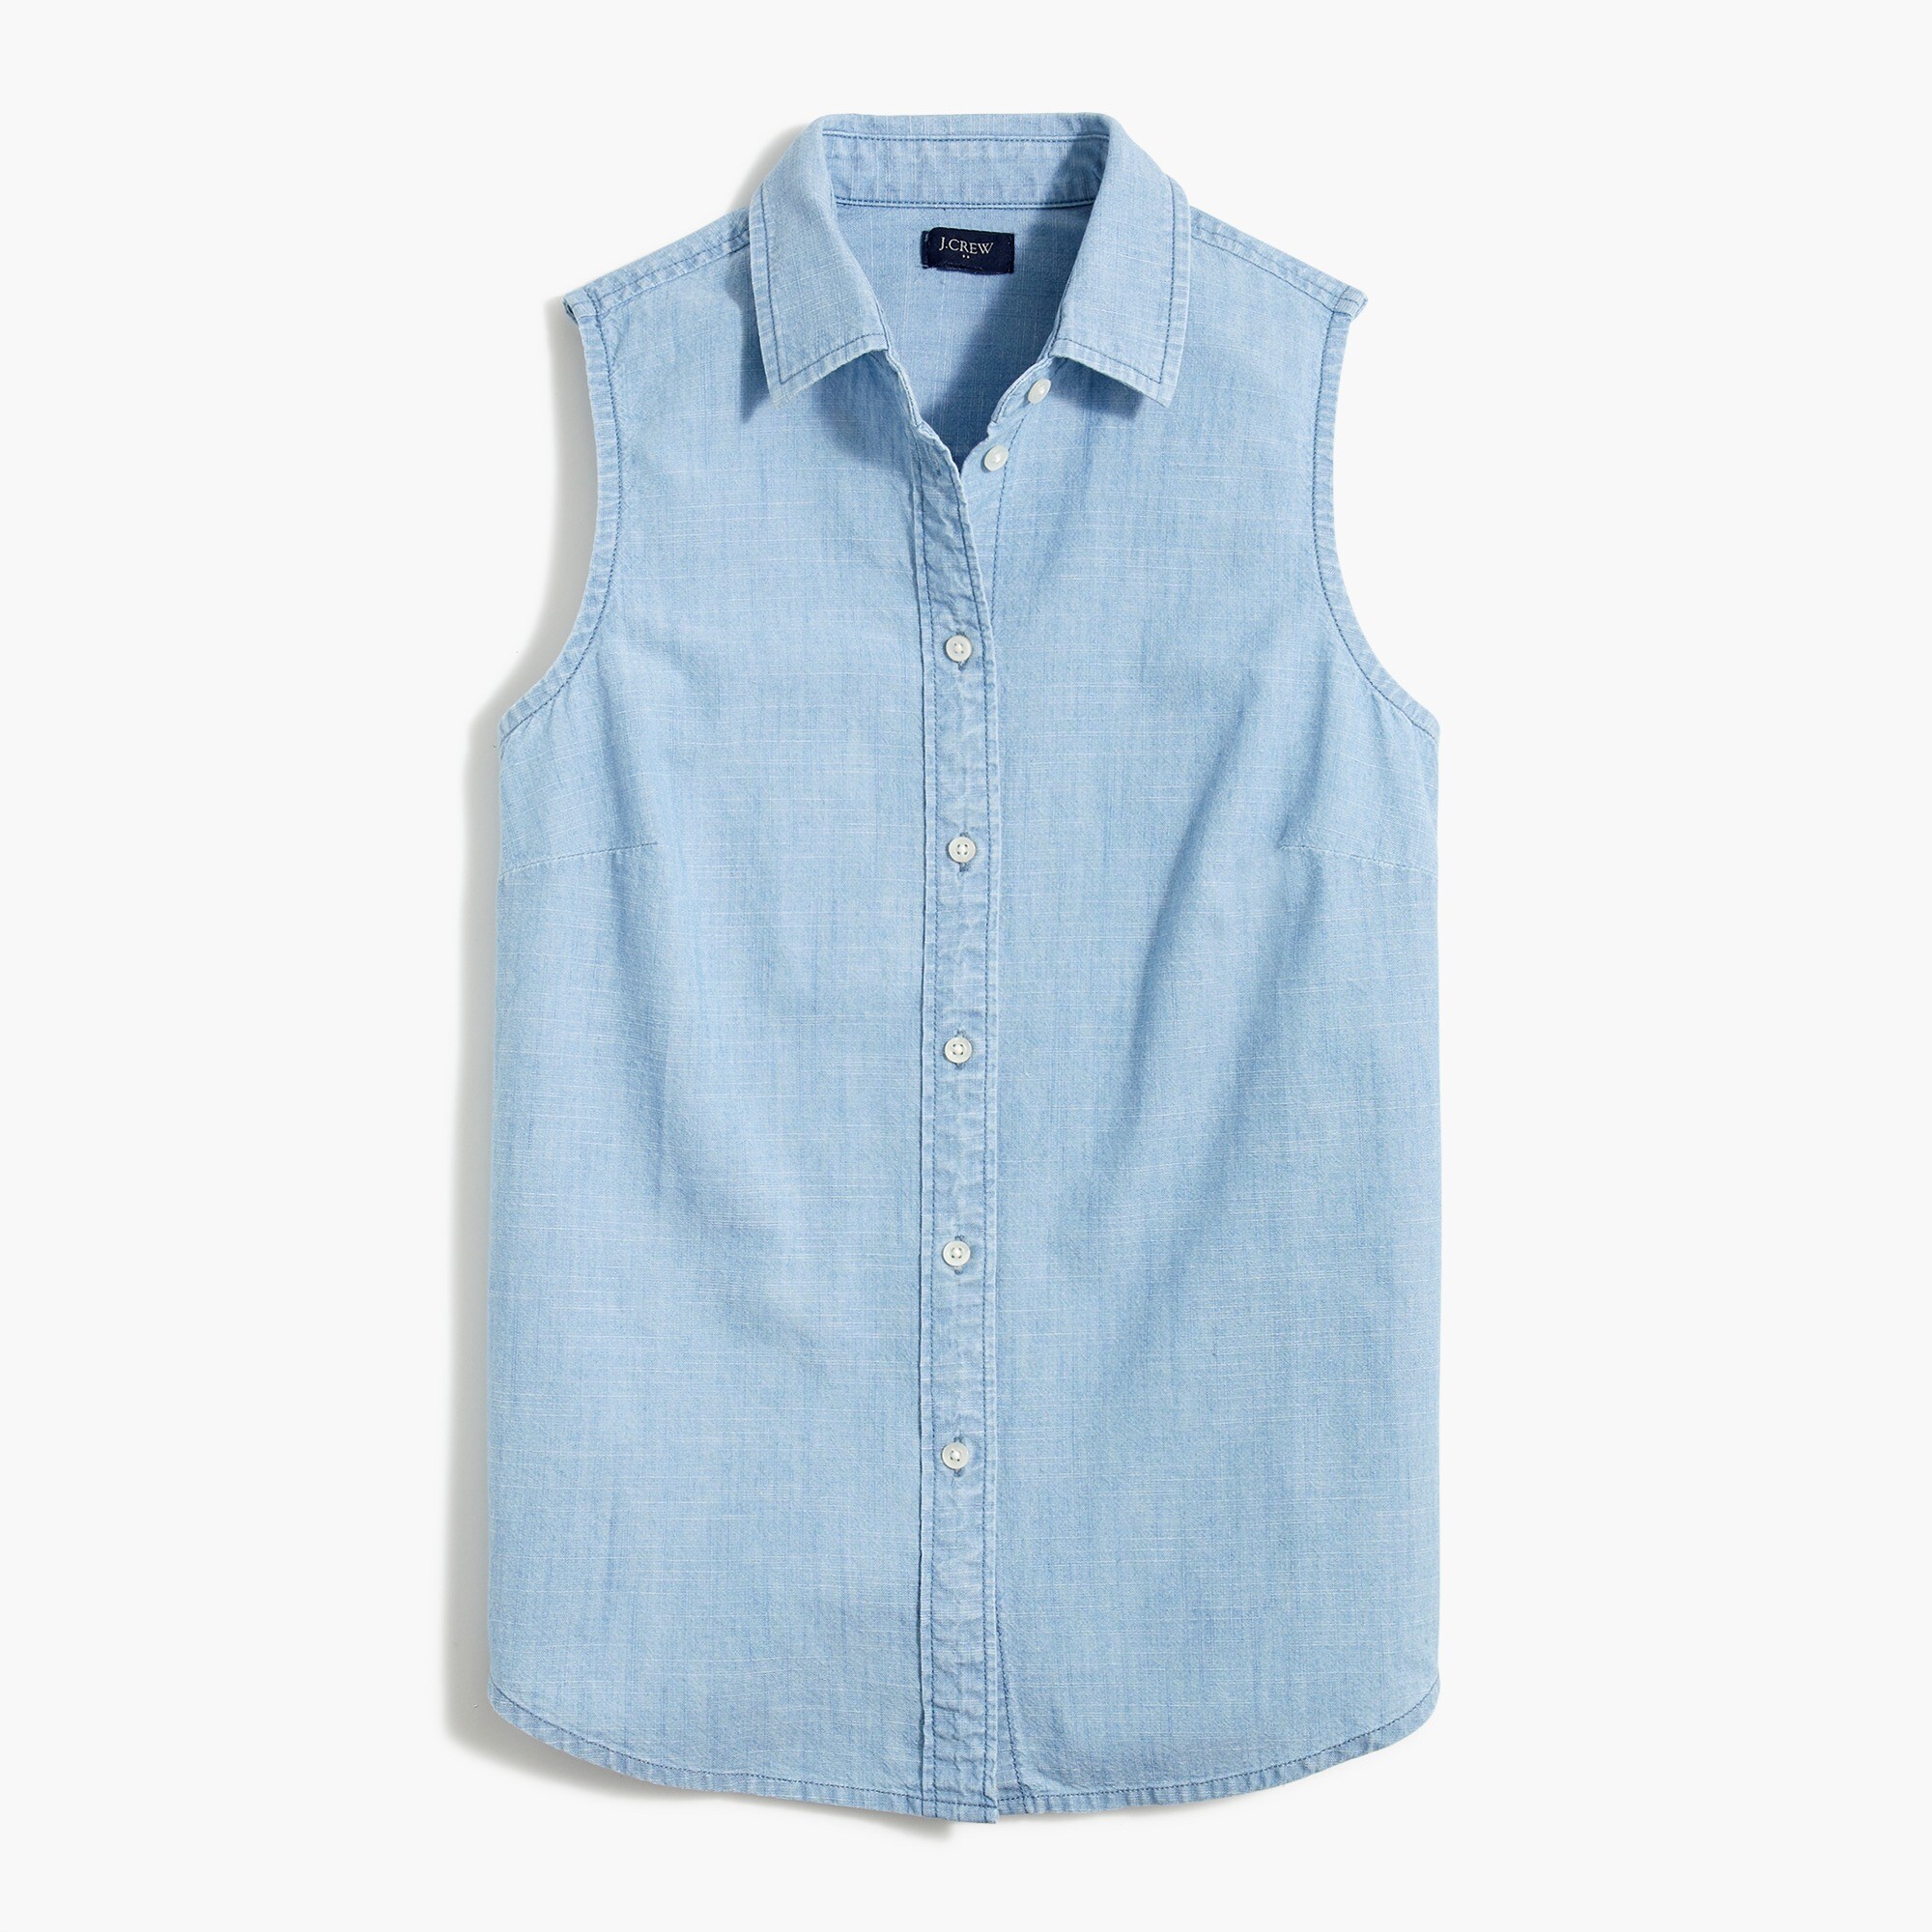  Chambray button-up shirt in signature fit